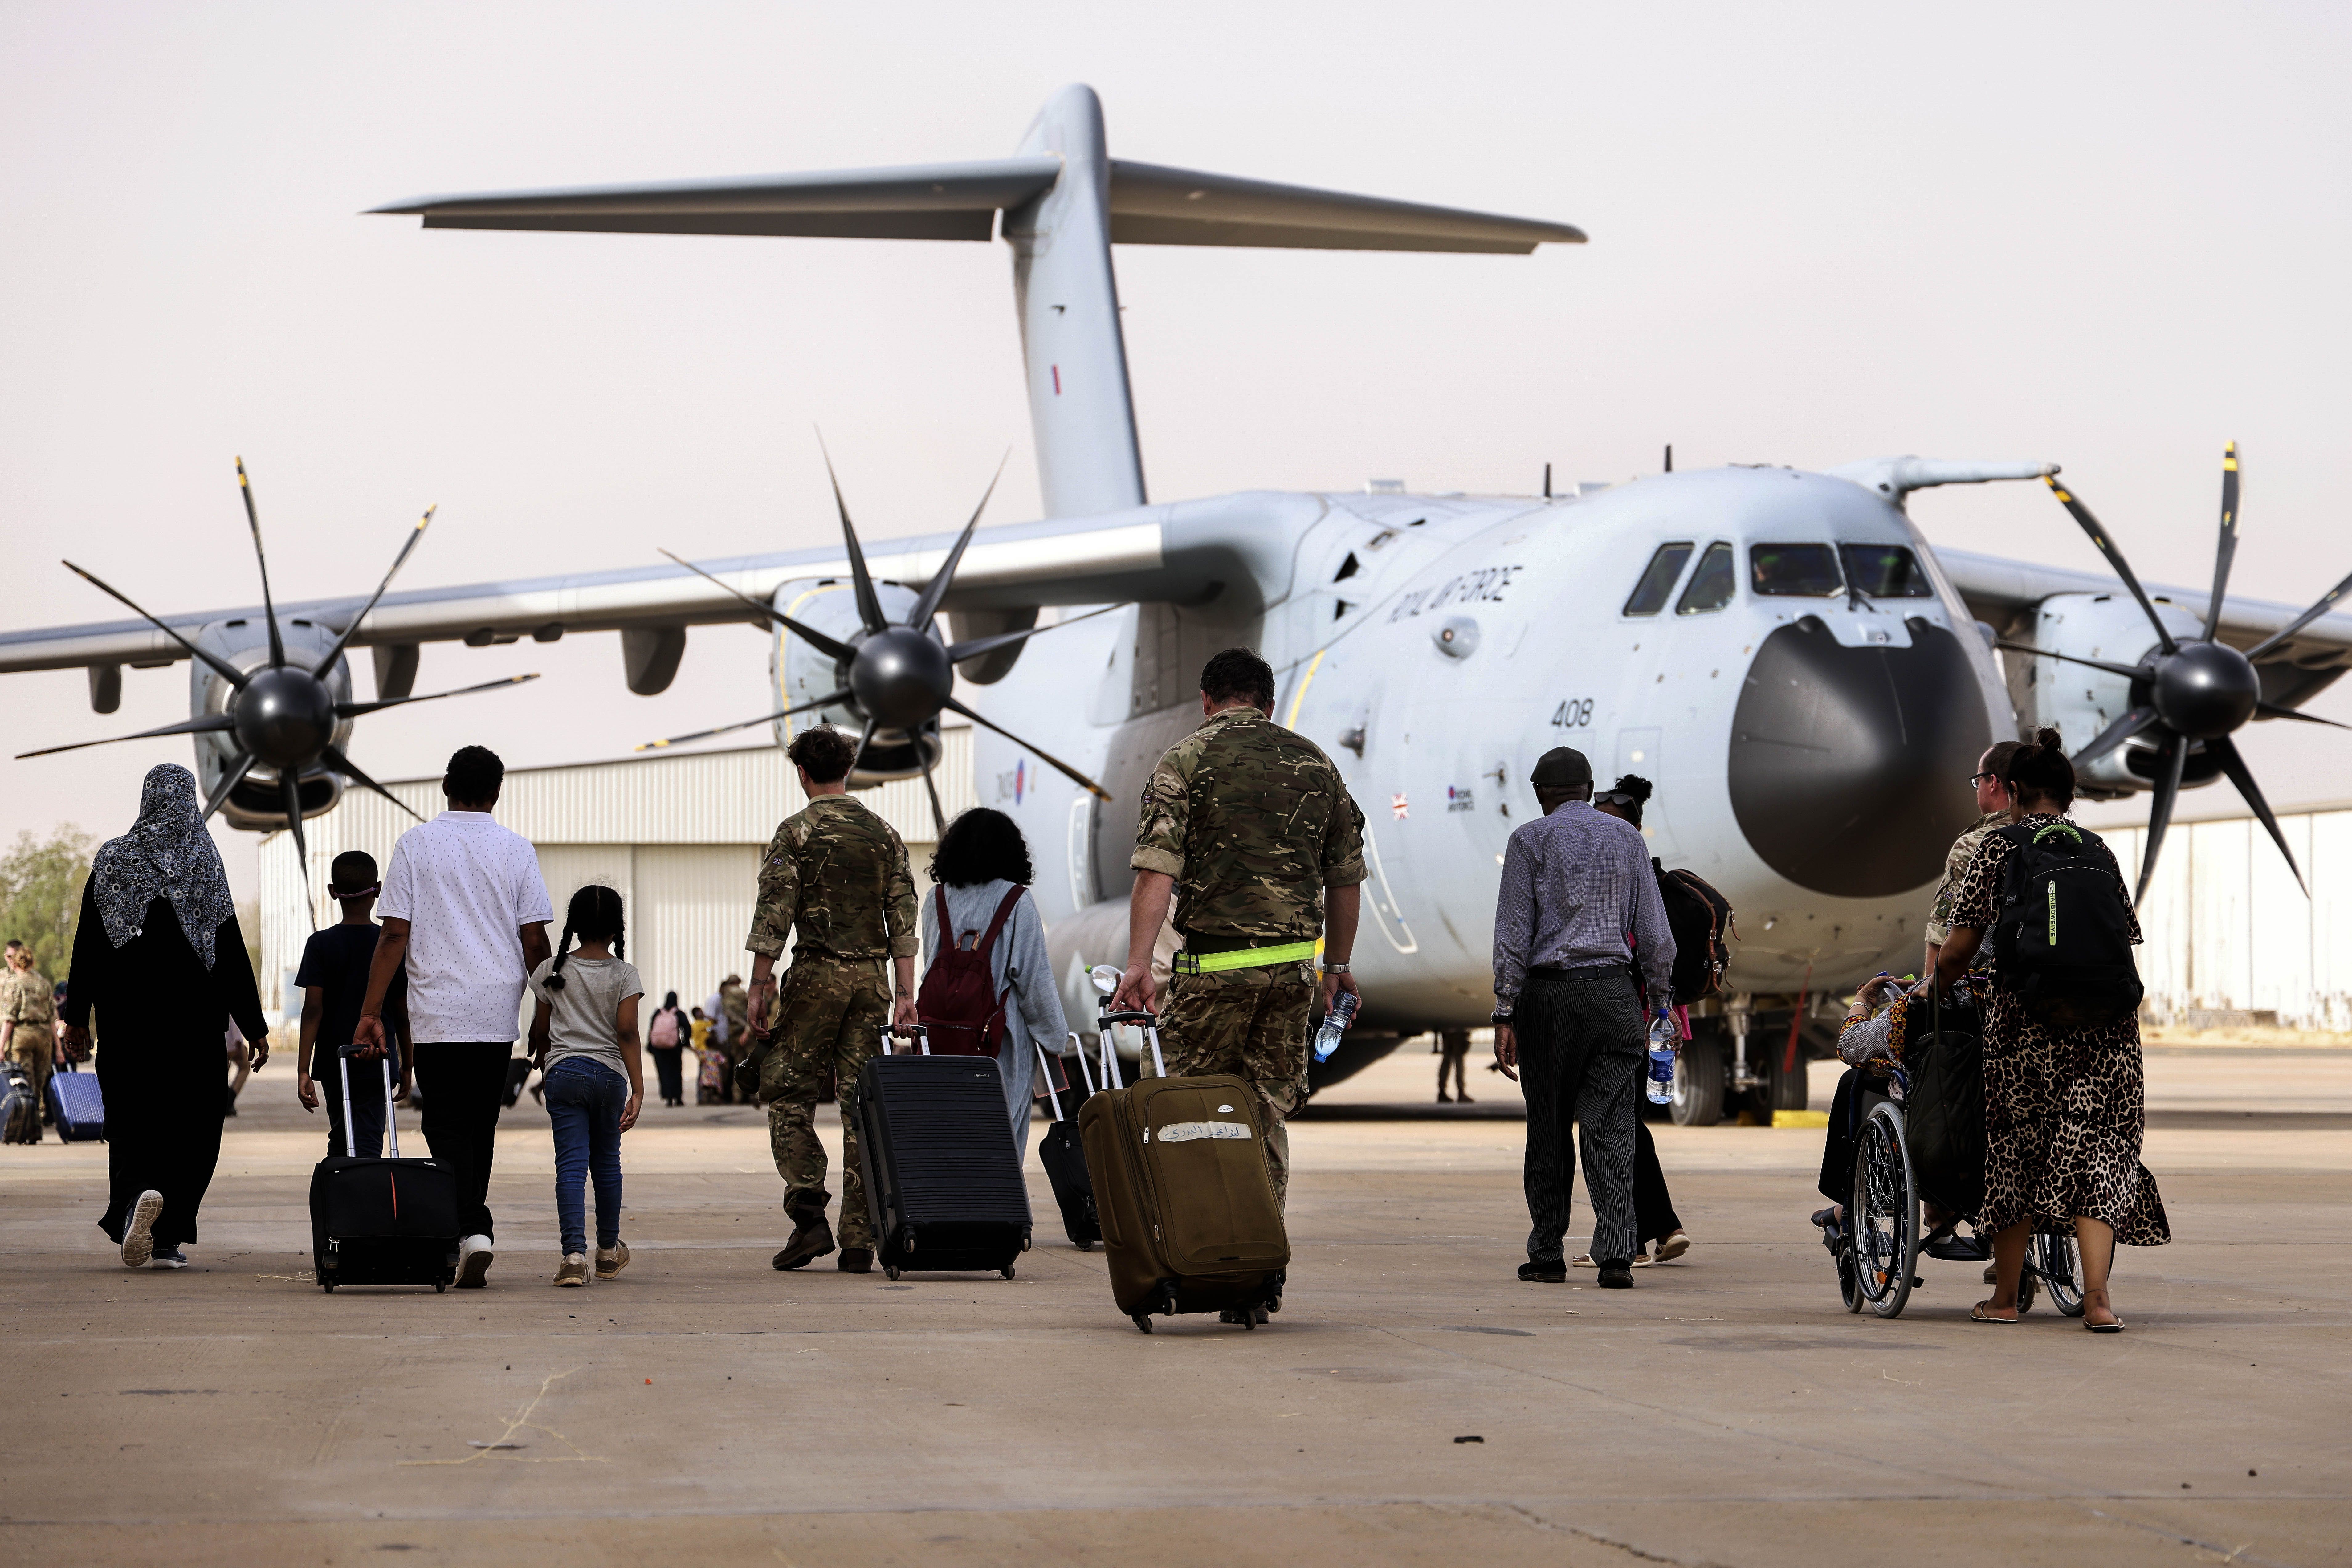 British nationals board an RAF aircraft in Khartoum, as the UK confirmed that almost 900 Britons have been evacuated from the country